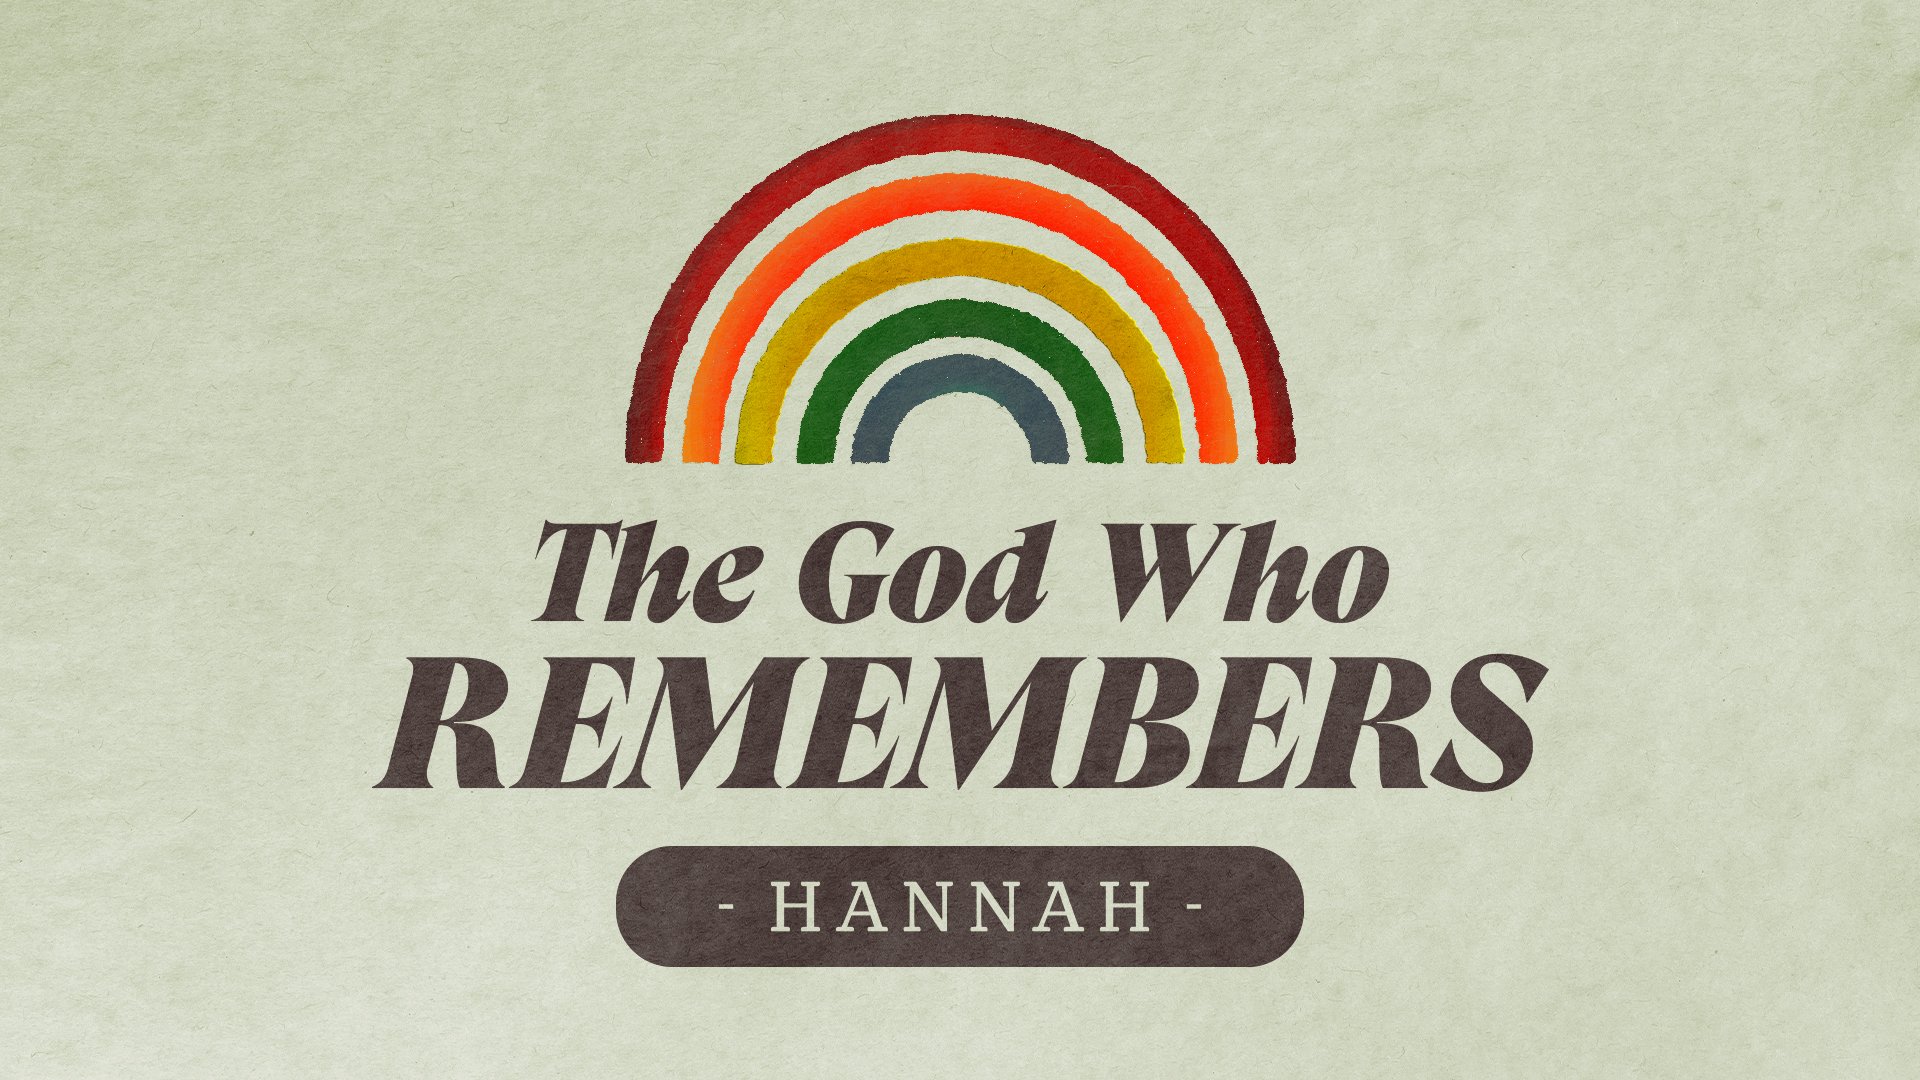 The God Who Remembers: Hannah